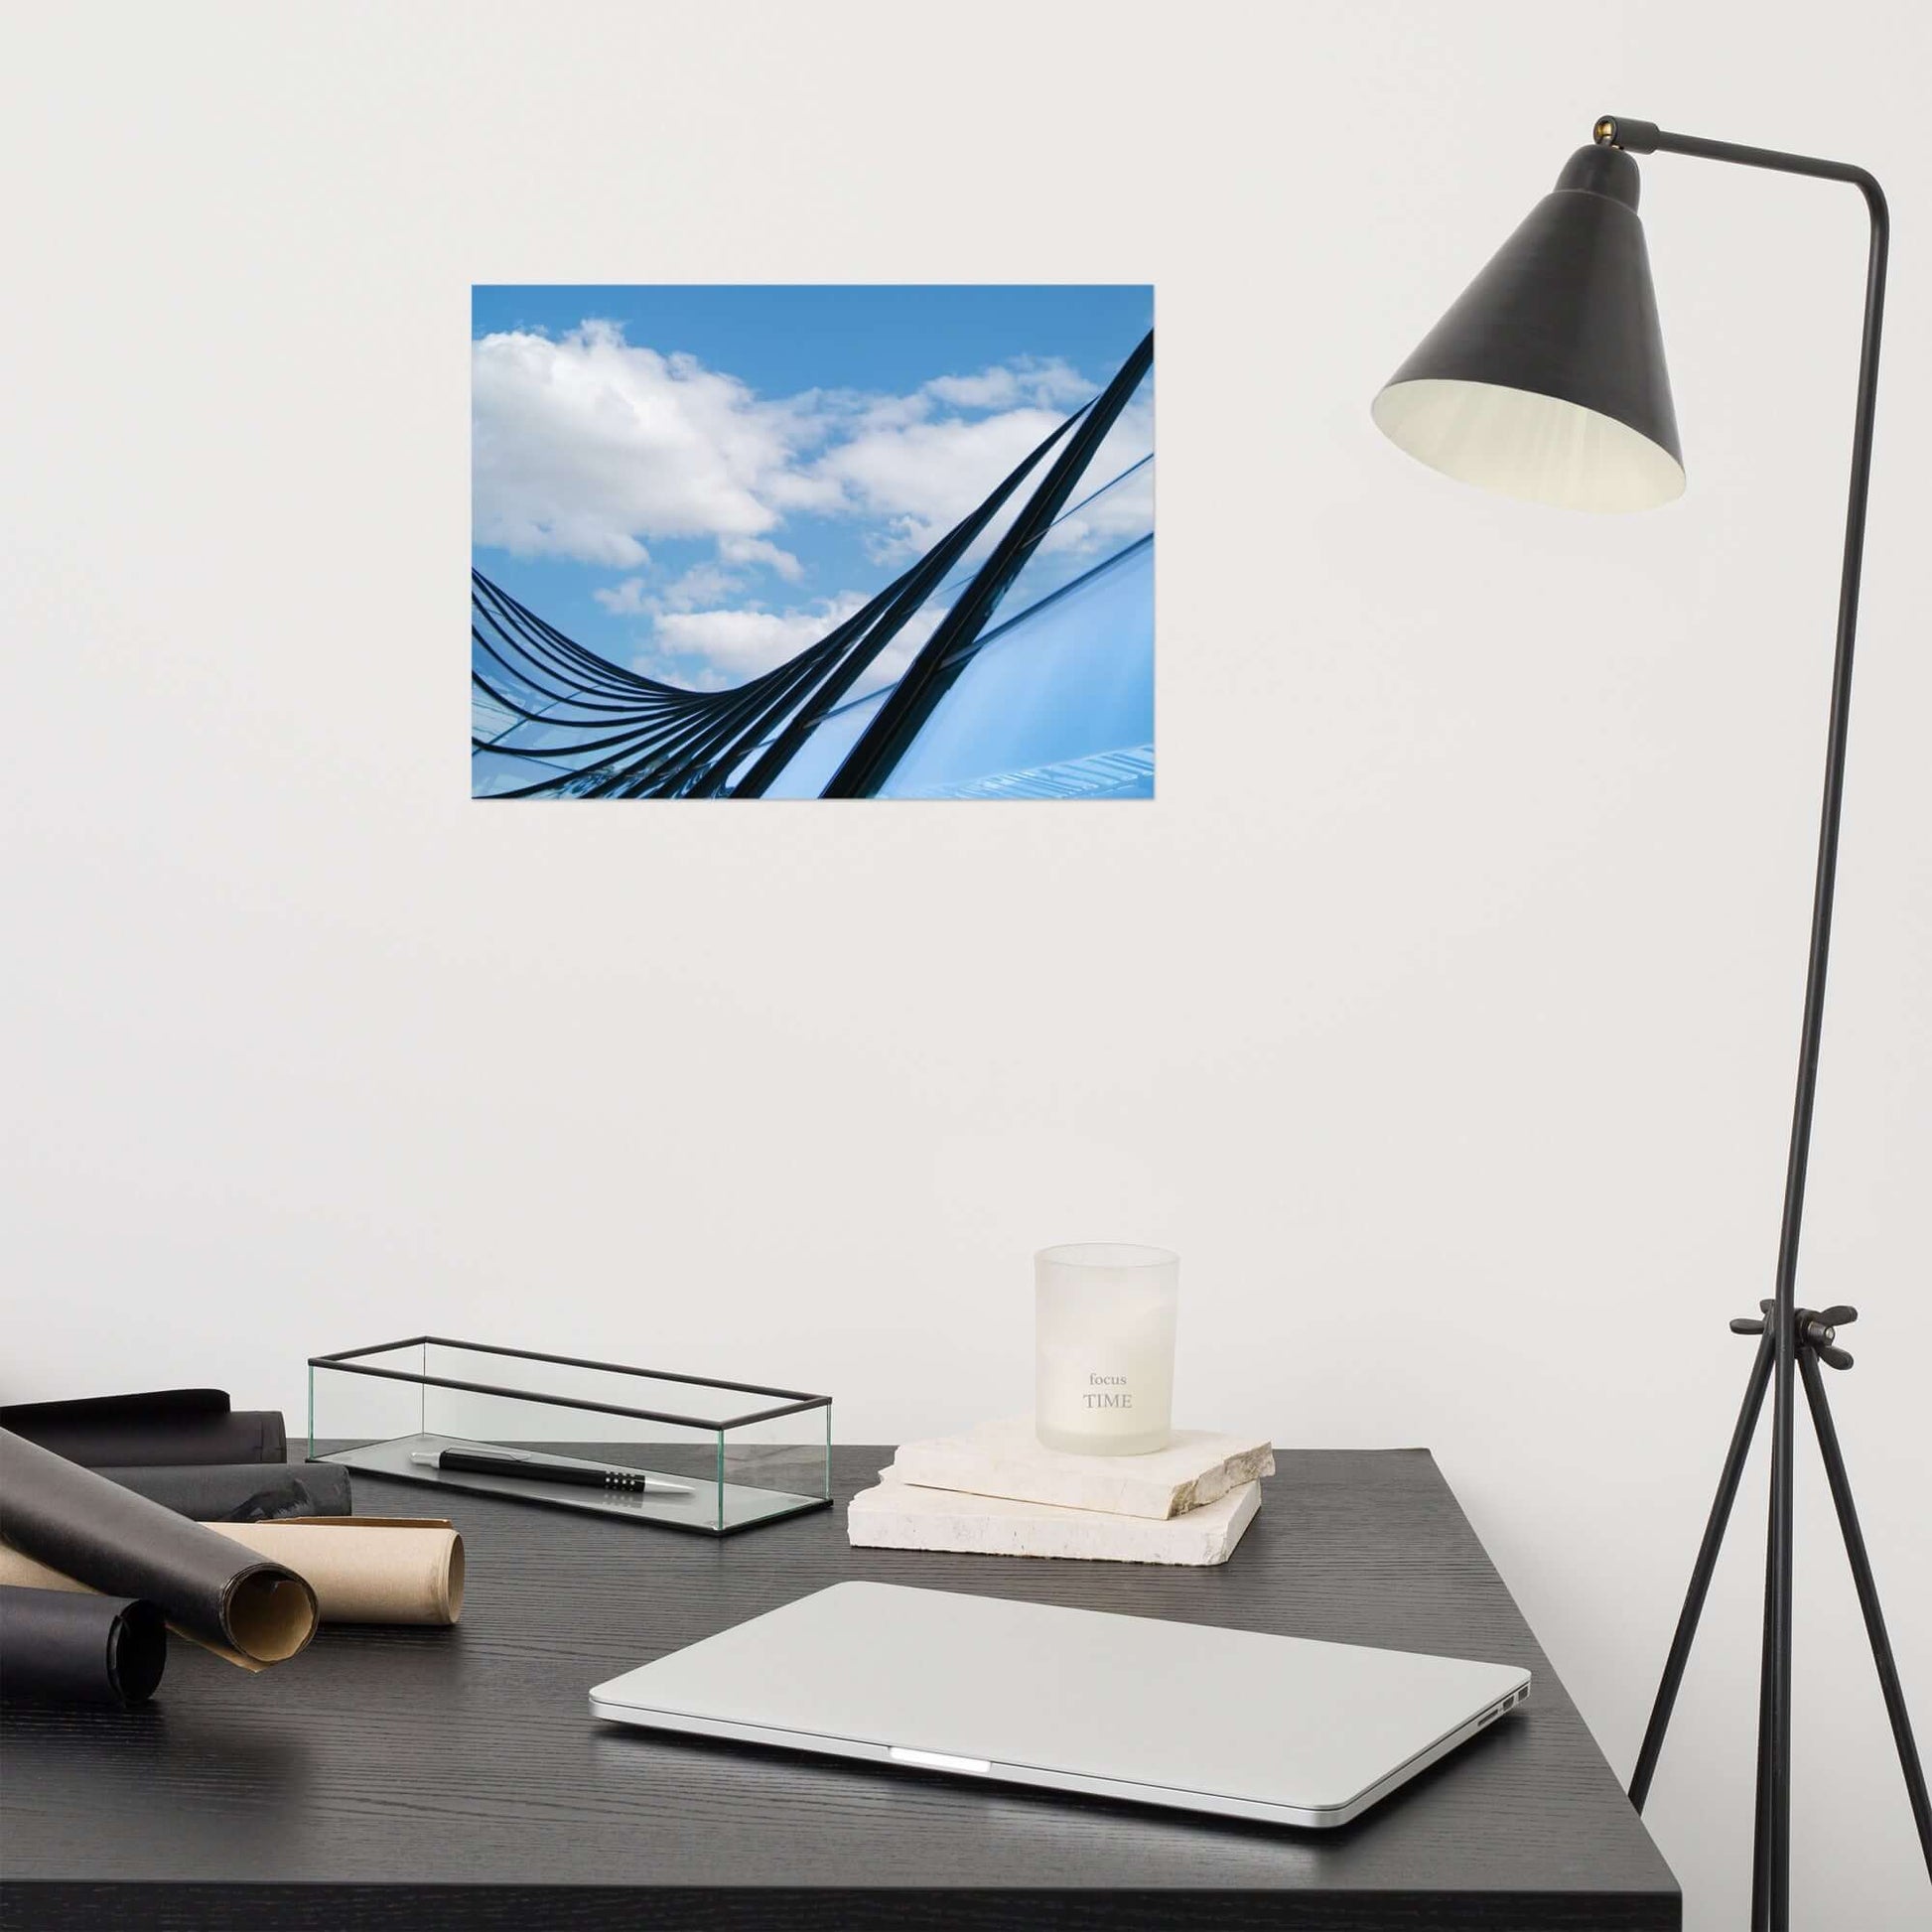 Architecture Photography Art: Glass and Azure Frameable Art Print